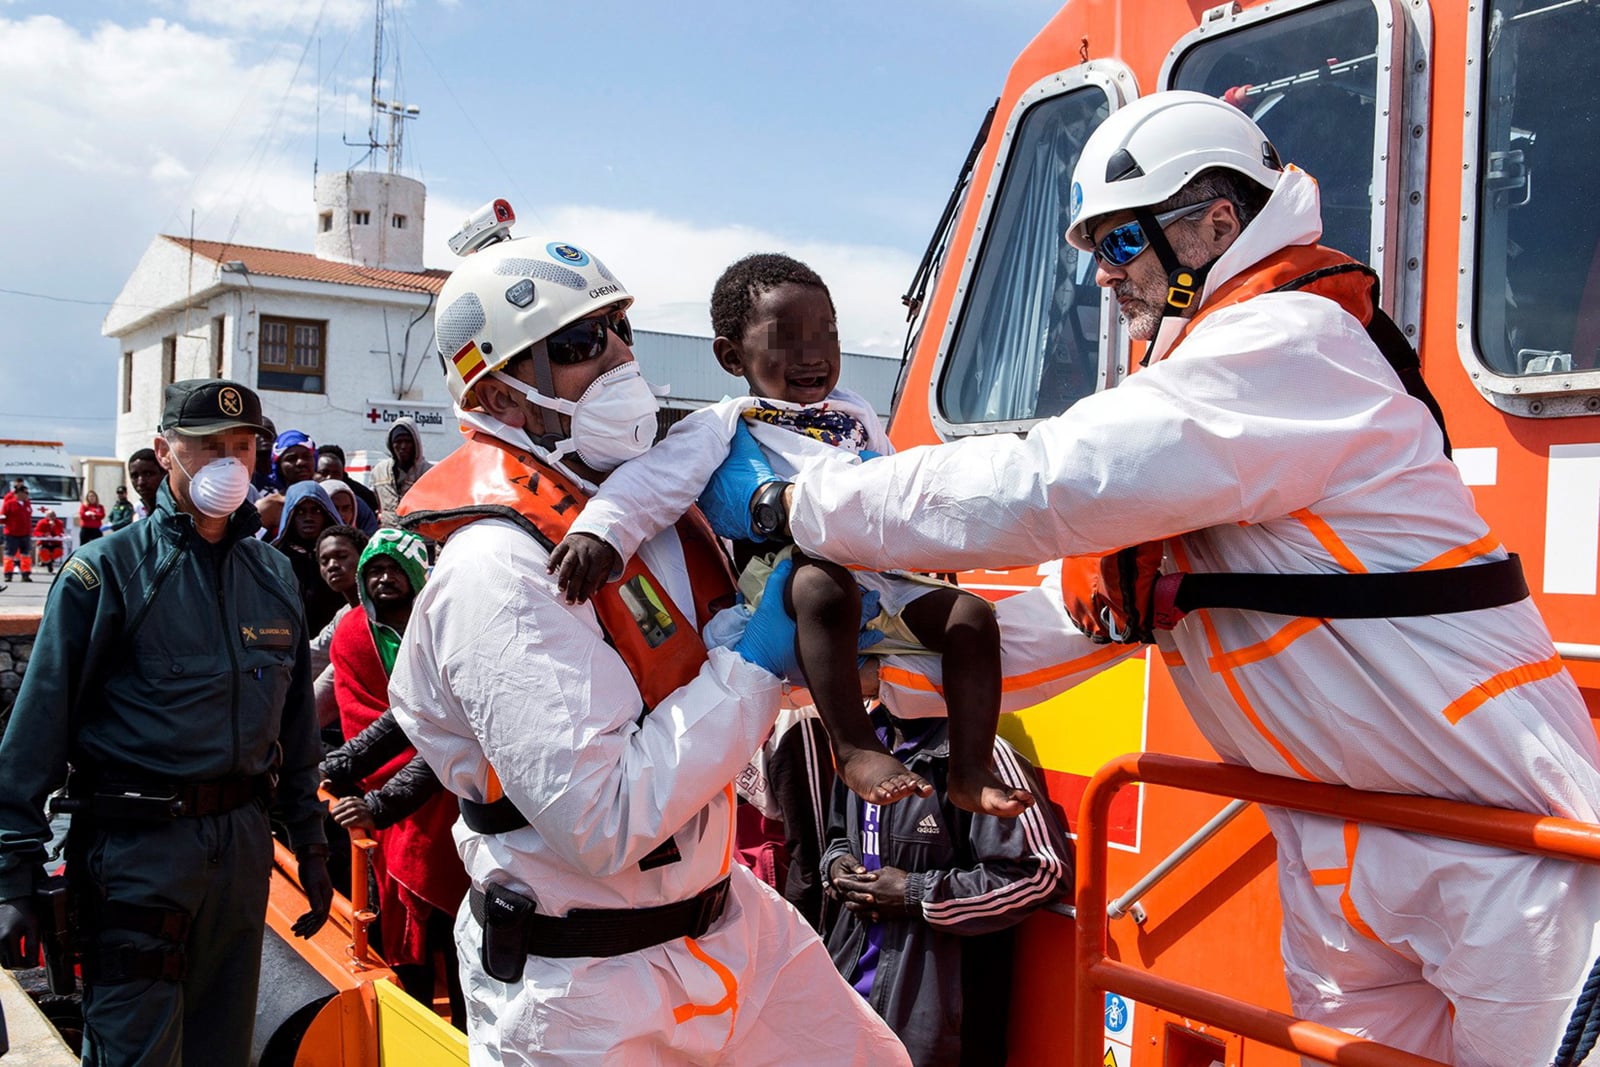 epa06711516 Members of the Maritime Safety and Rescue Society of Spain hold a child as they assist 88 migrants, who have been rescued while travelling in two little ship near Motril, Granada, Andalusia, Spain, 04 May 2018.  EPA/MIGUEL PAQUET ATTENTION EDITORS: IMAGE PIXELATED AT SOURCE 
Dostawca: PAP/EPA.